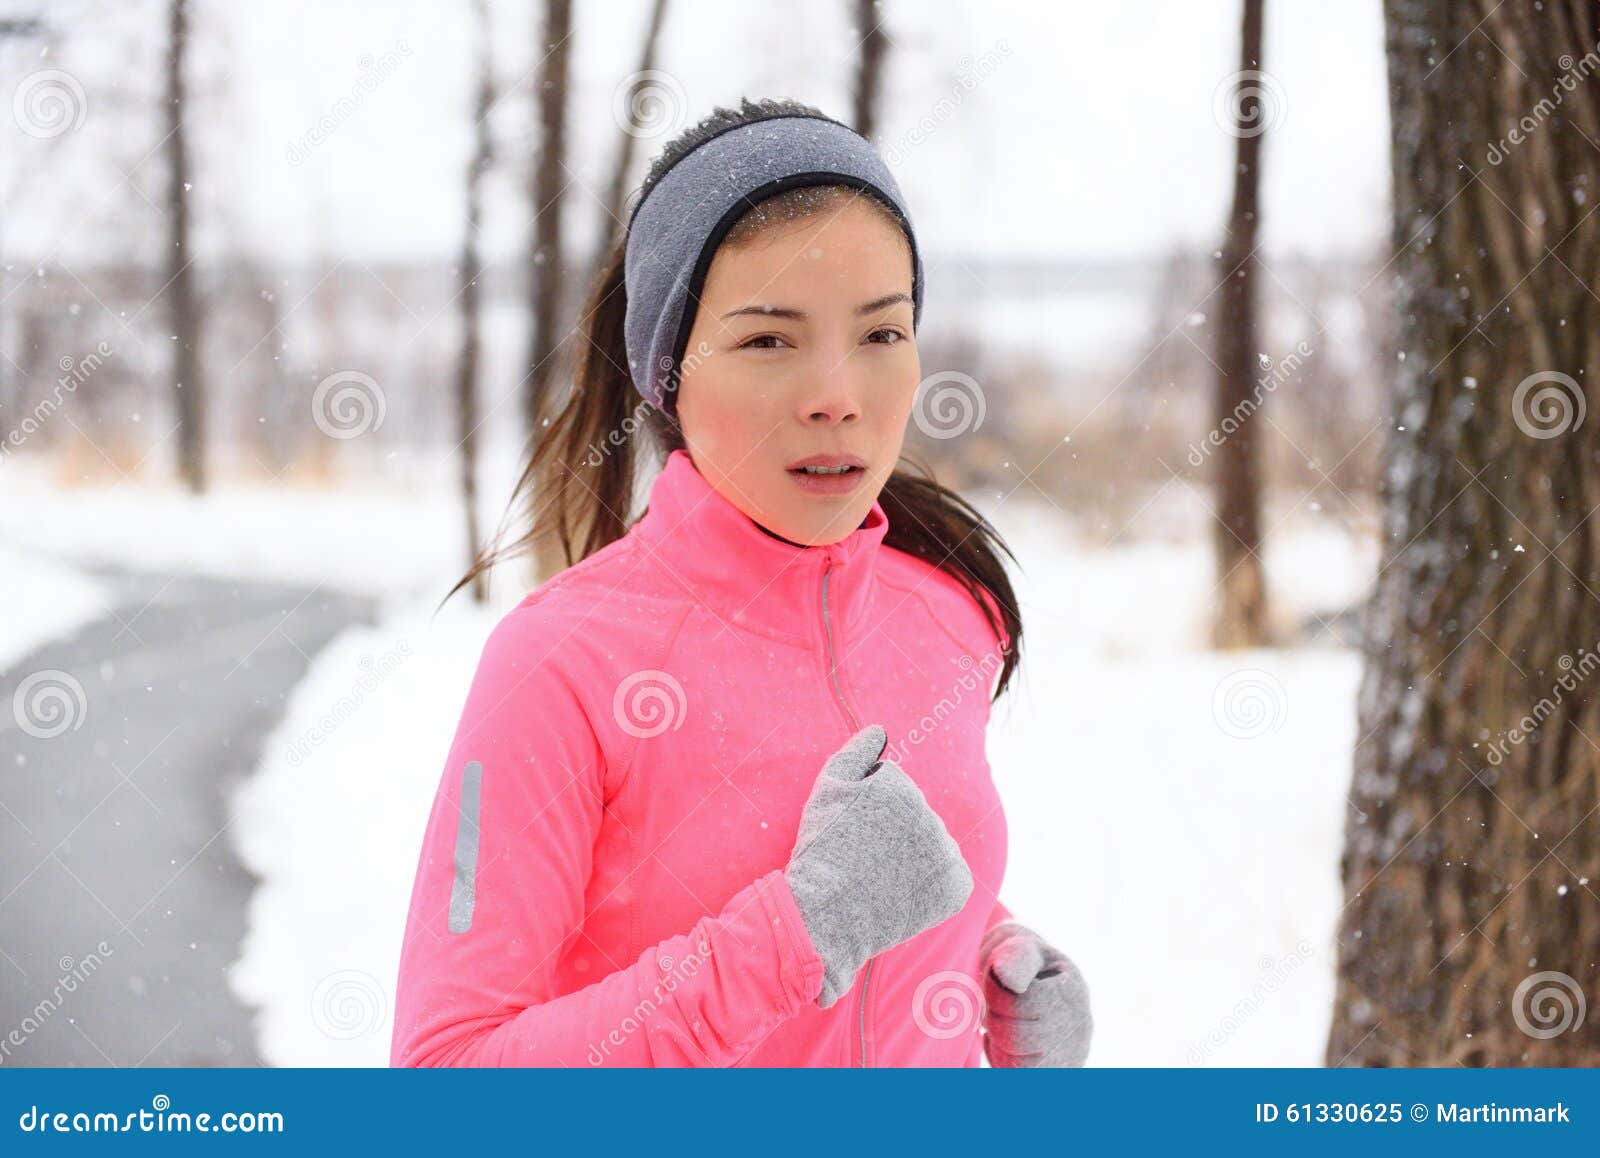 Asian Woman Running in Winter Gloves and Headband Stock Image